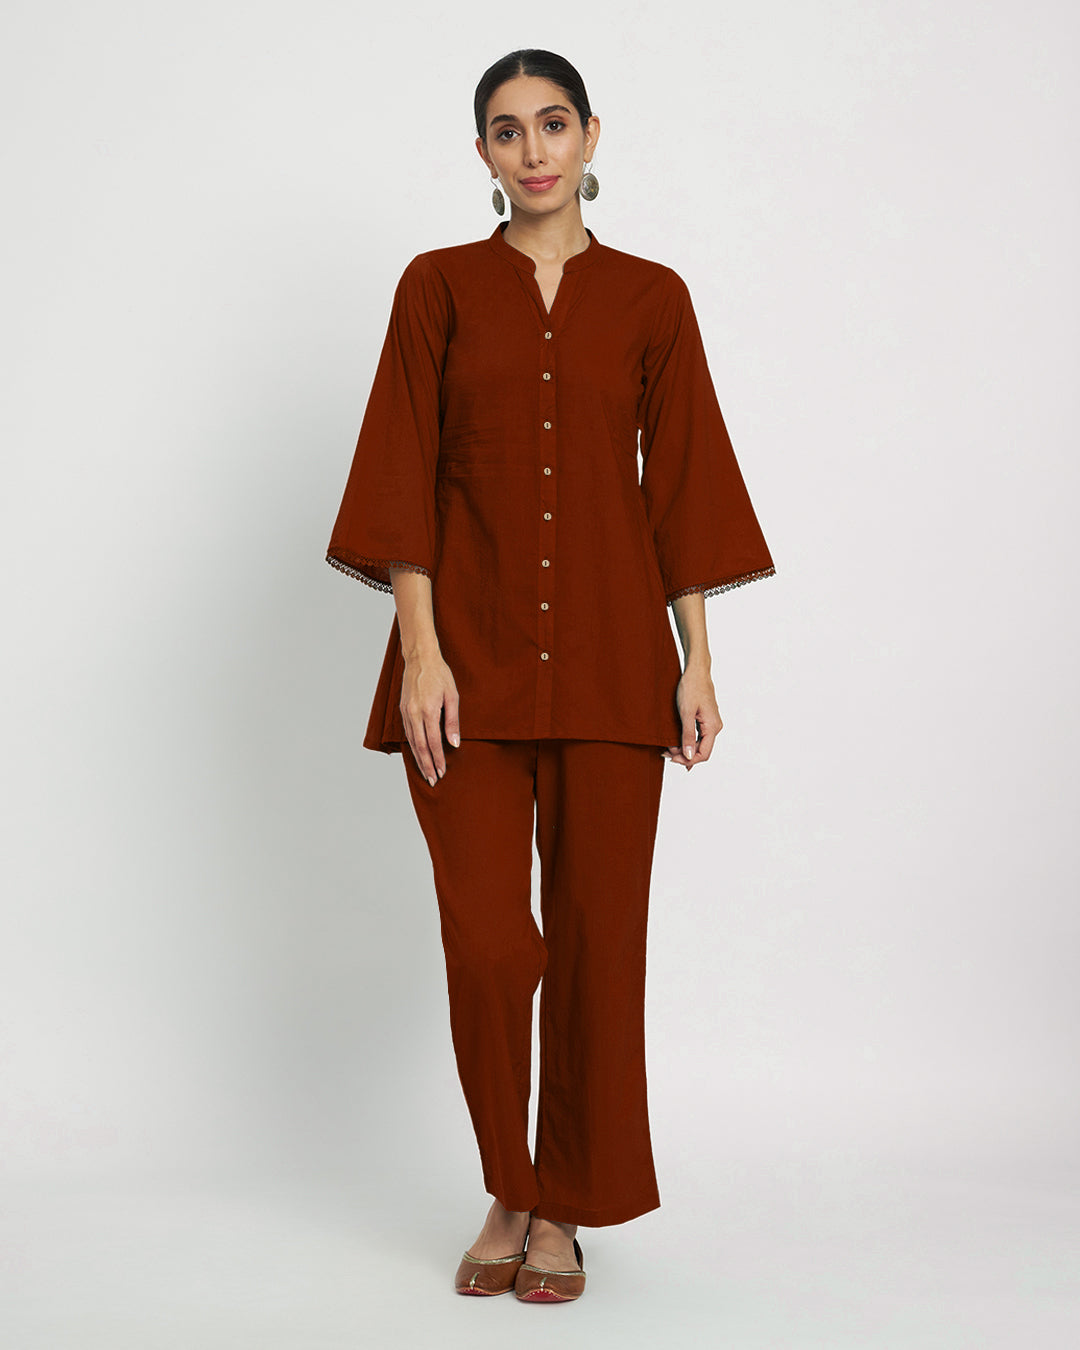 Russet Red Flared Solid Kurta (Without Bottoms)